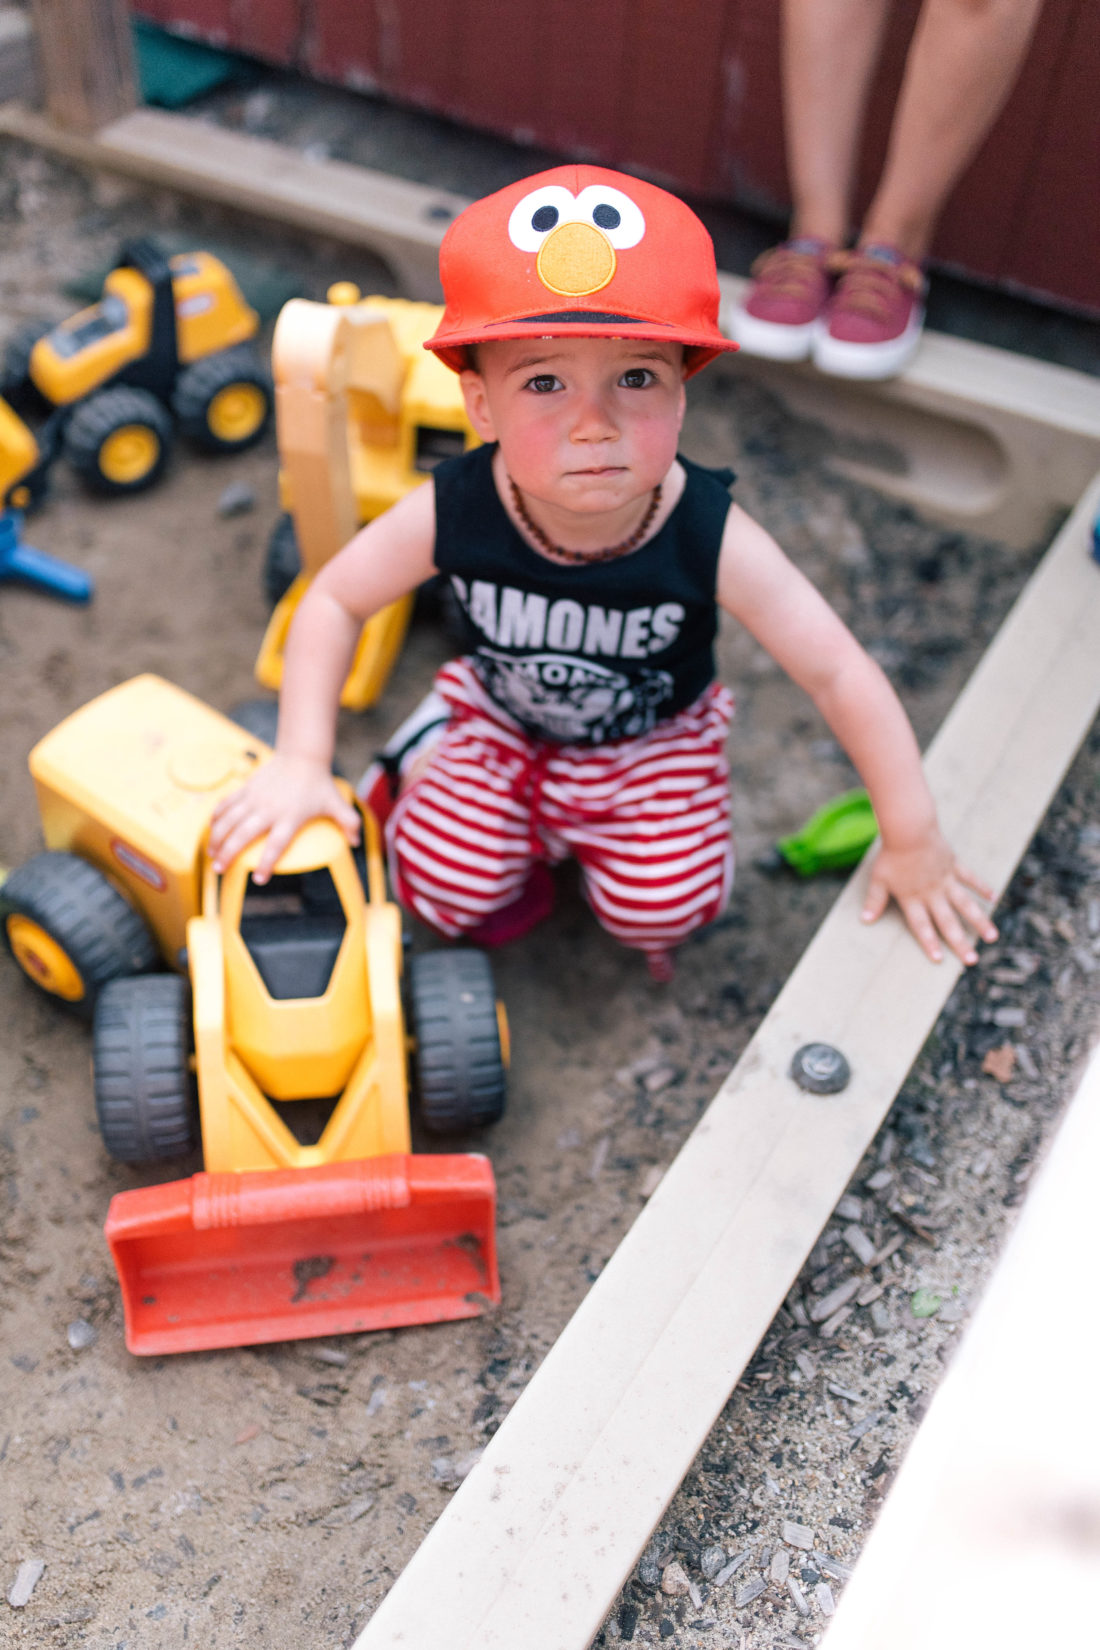 Major Martino wears an Elmo hat, and a ramones tank top, and plays in the sand at a playground in Connecticut